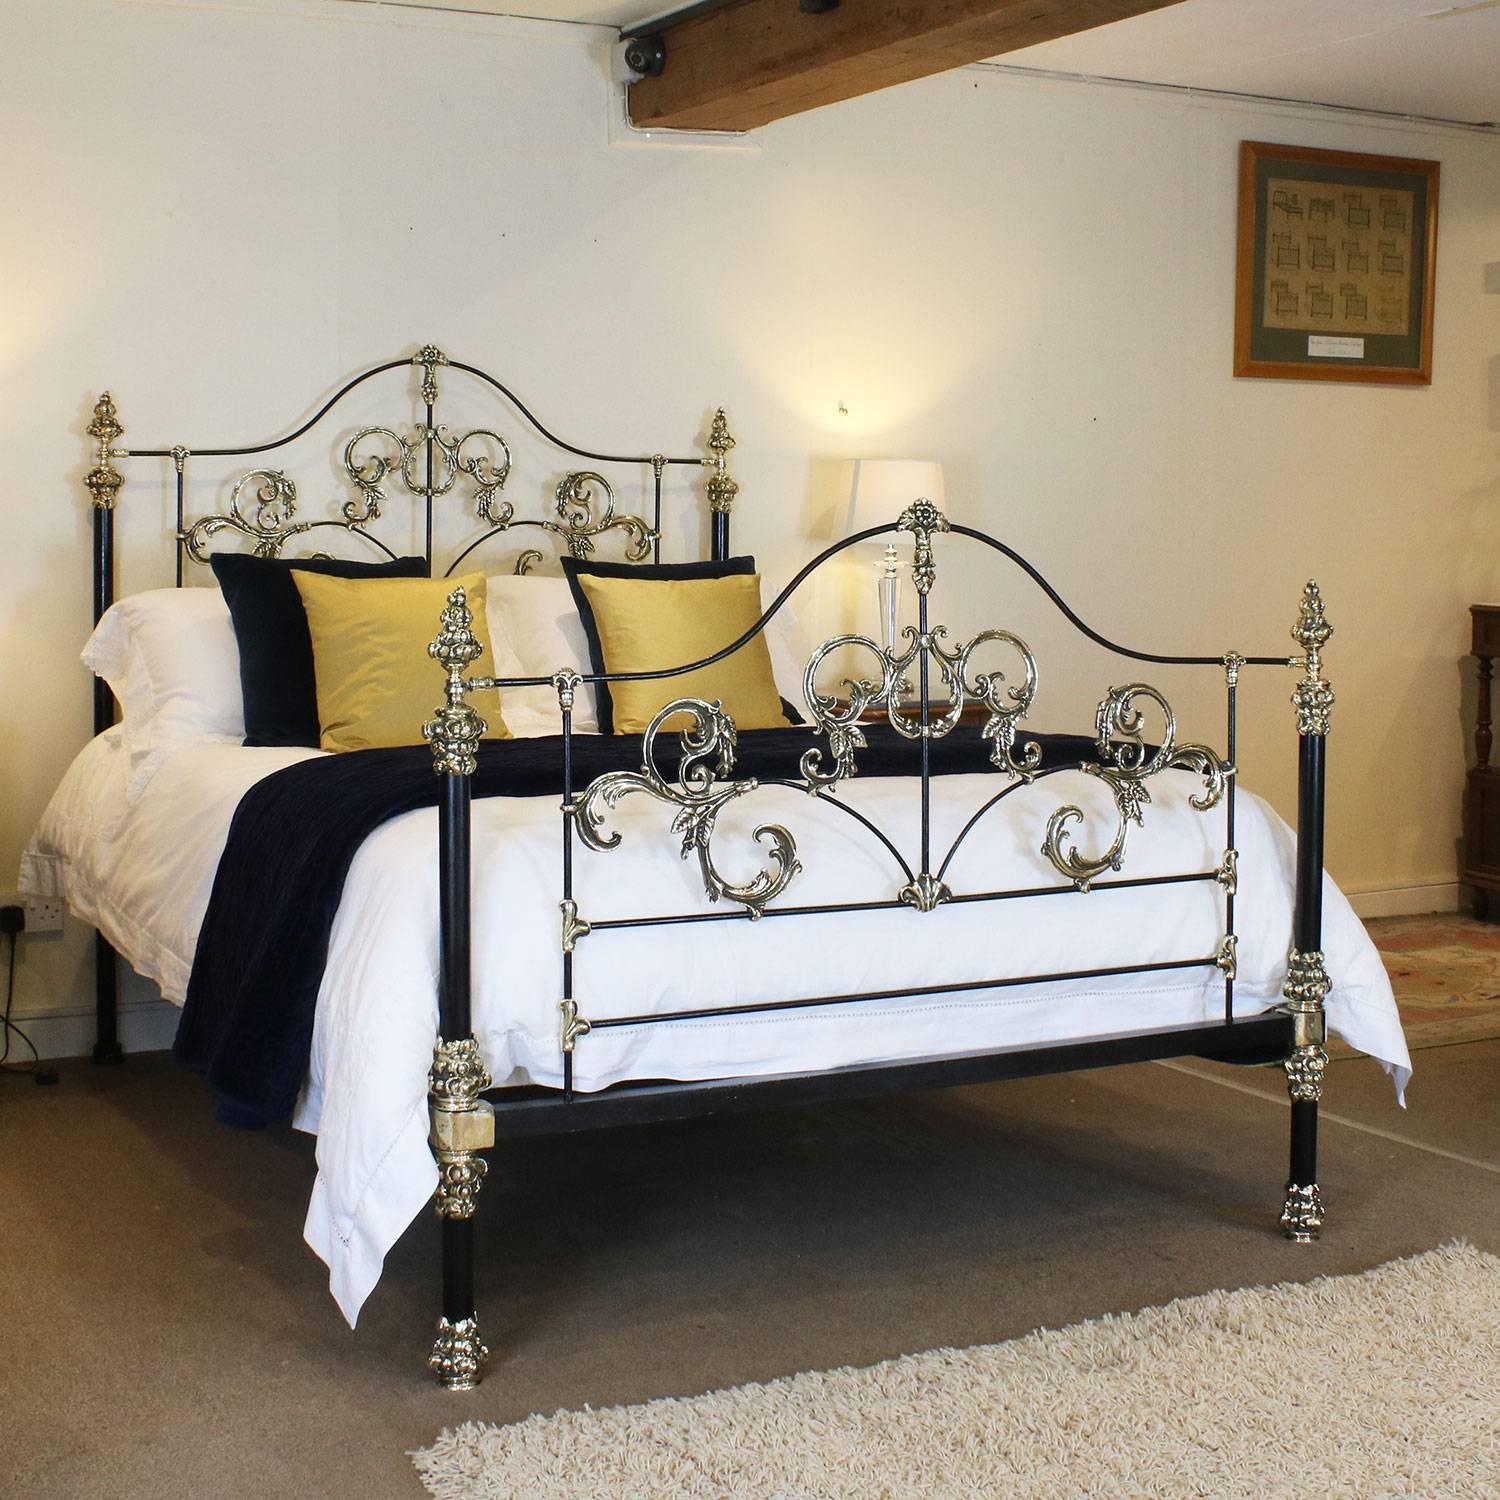 brass and iron bed